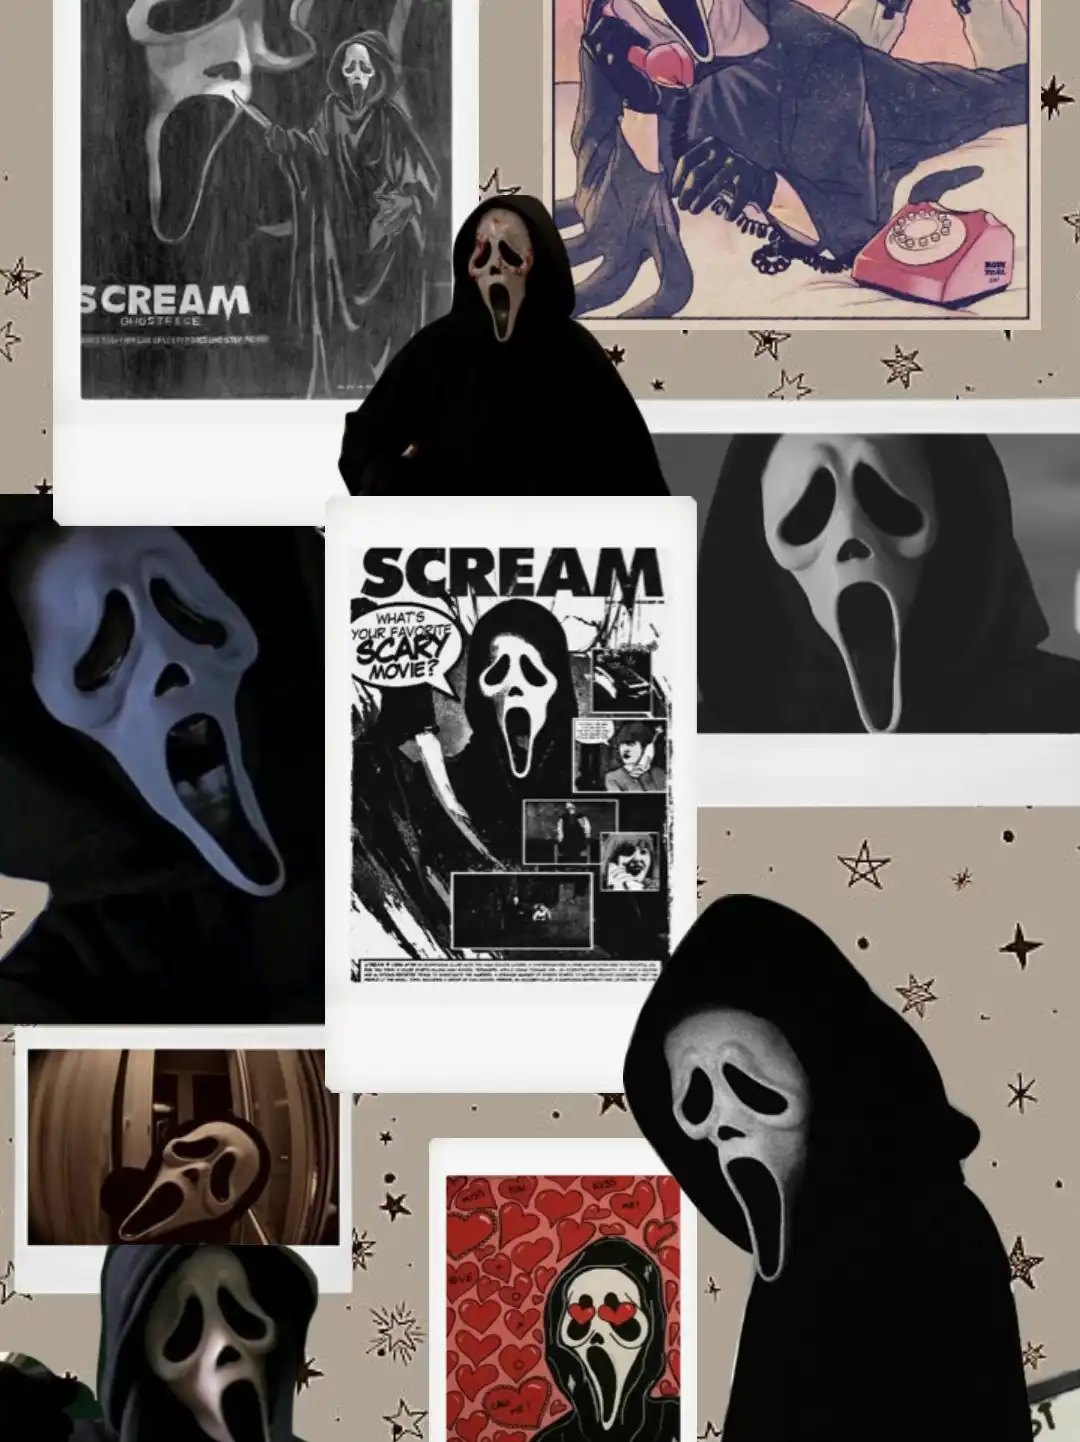 Collage of images of the ghostface mask from the scream movies - Ghostface